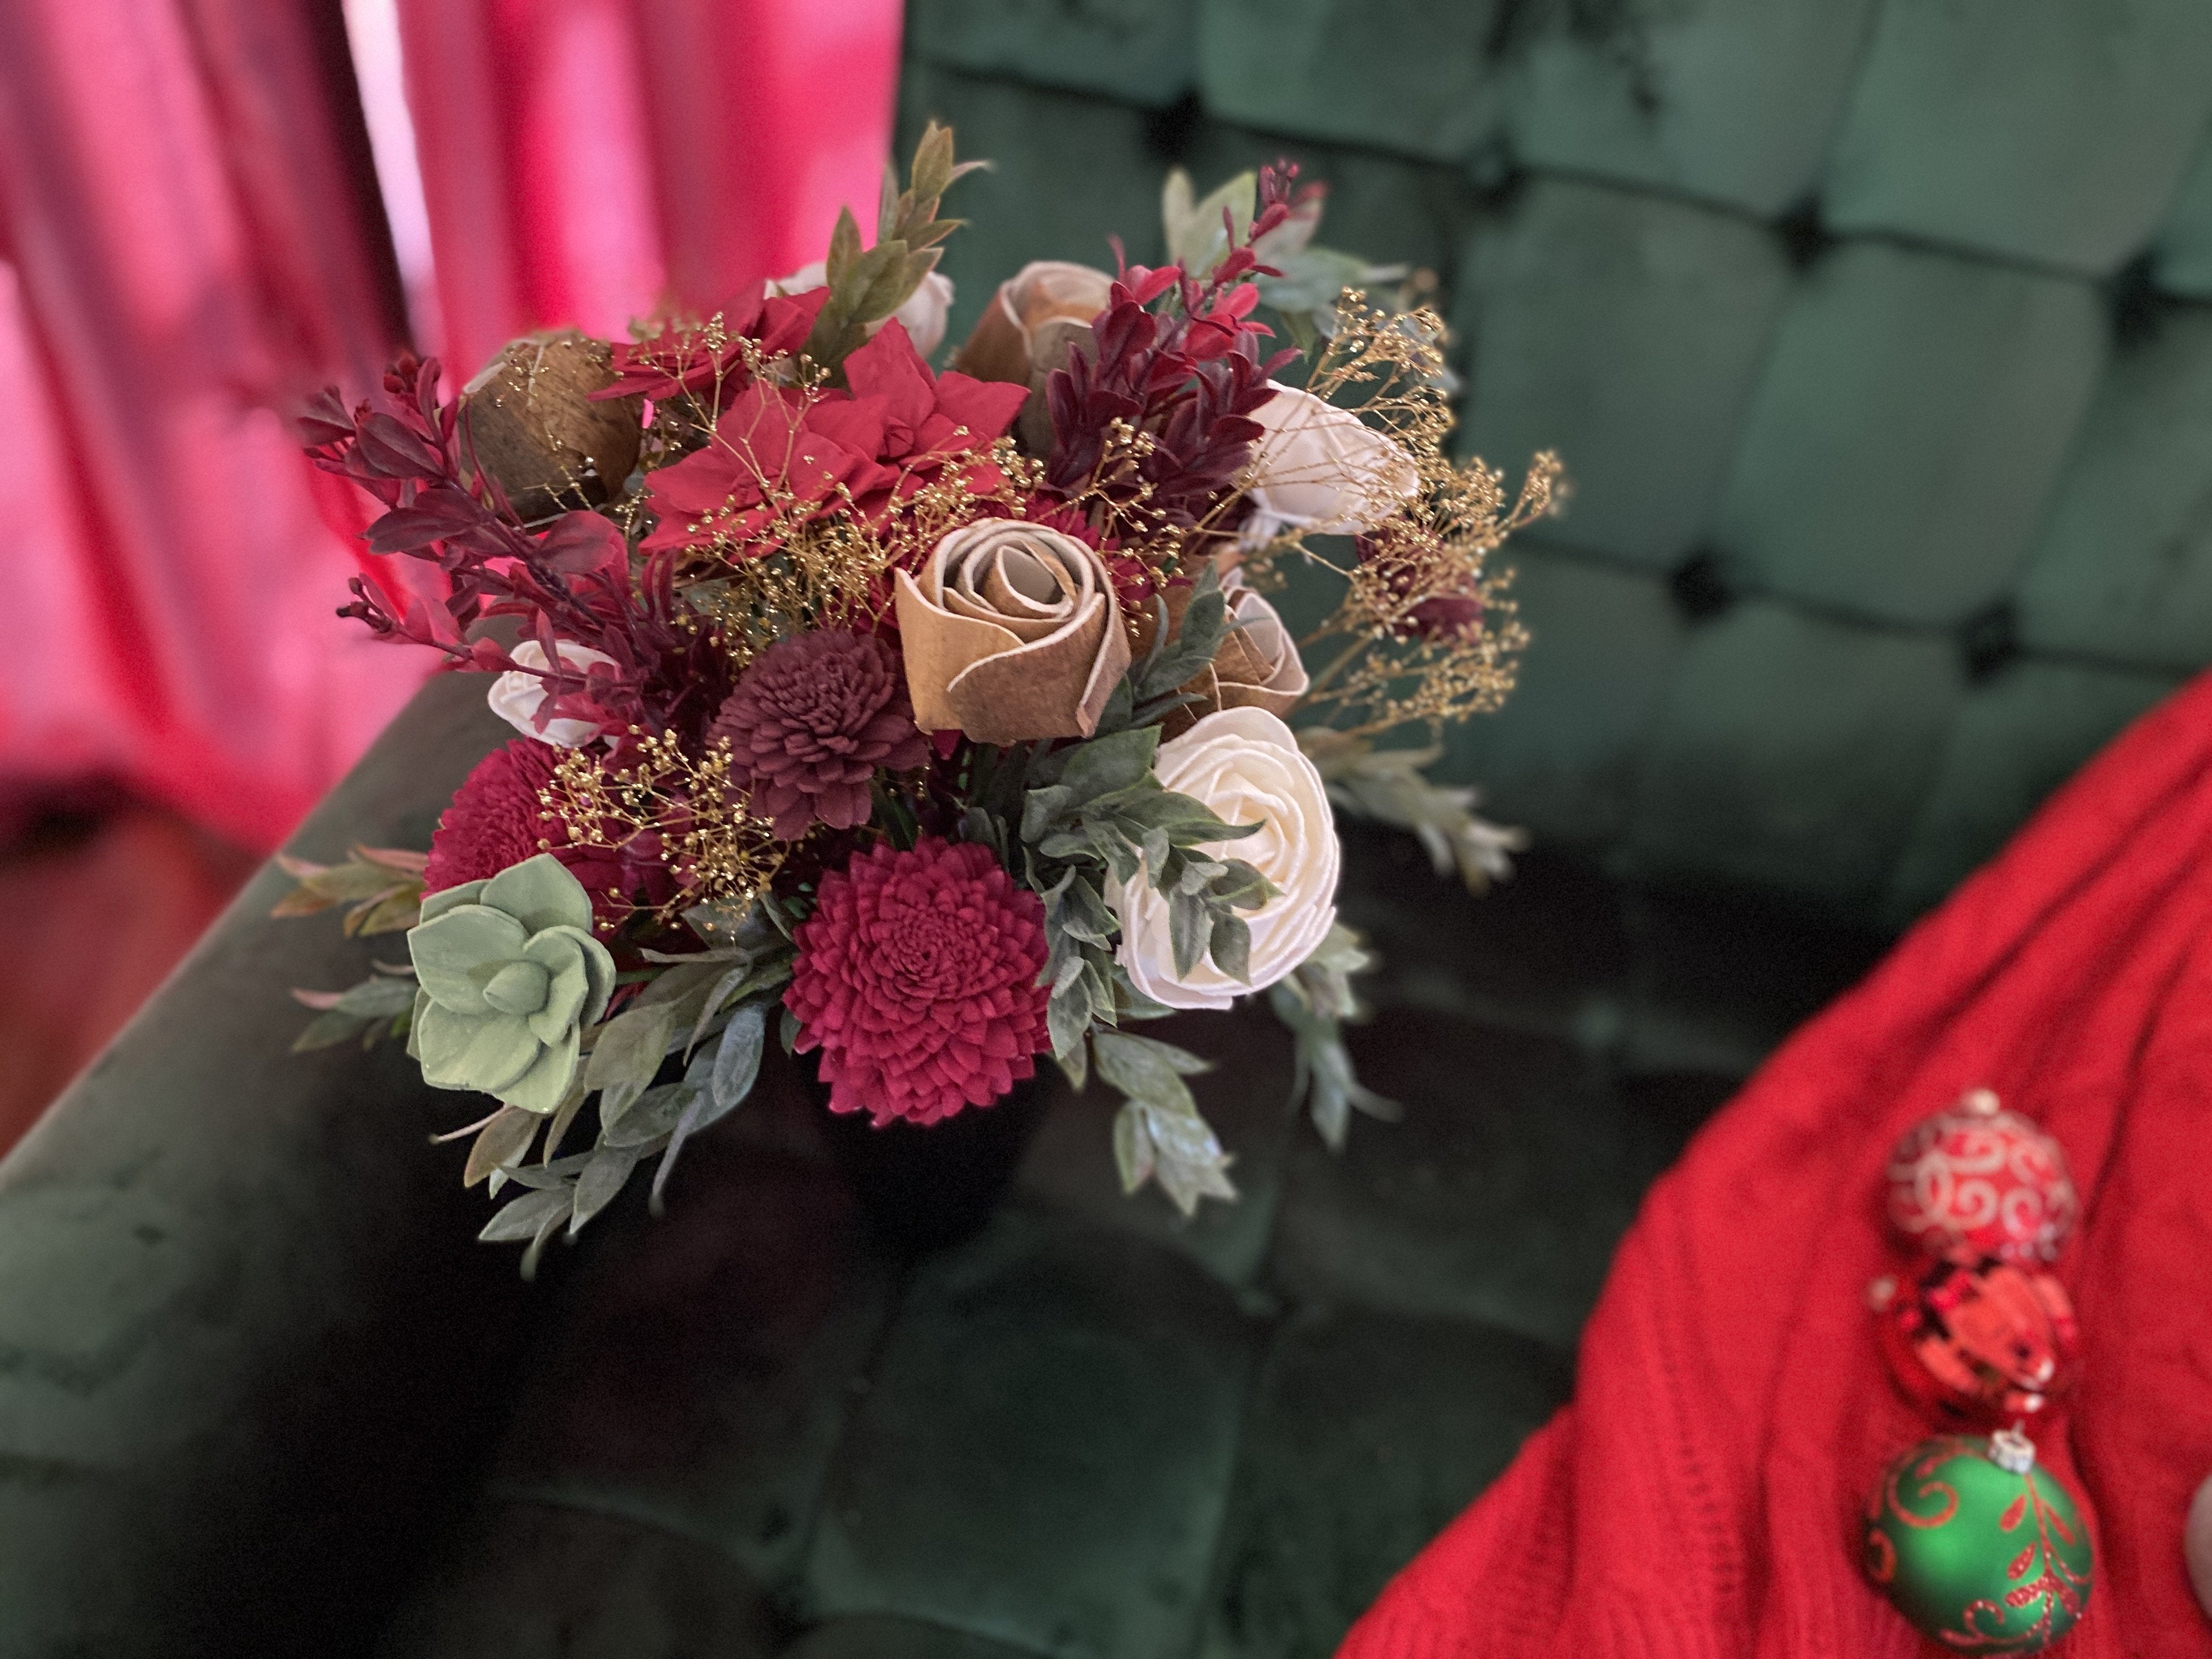 Wedding Christmas Corsage Red Gold Wedding Wrist Corsage Red Bridesmaids  Burgundy Corsage Pine Cone Winter Artificial Flowers 